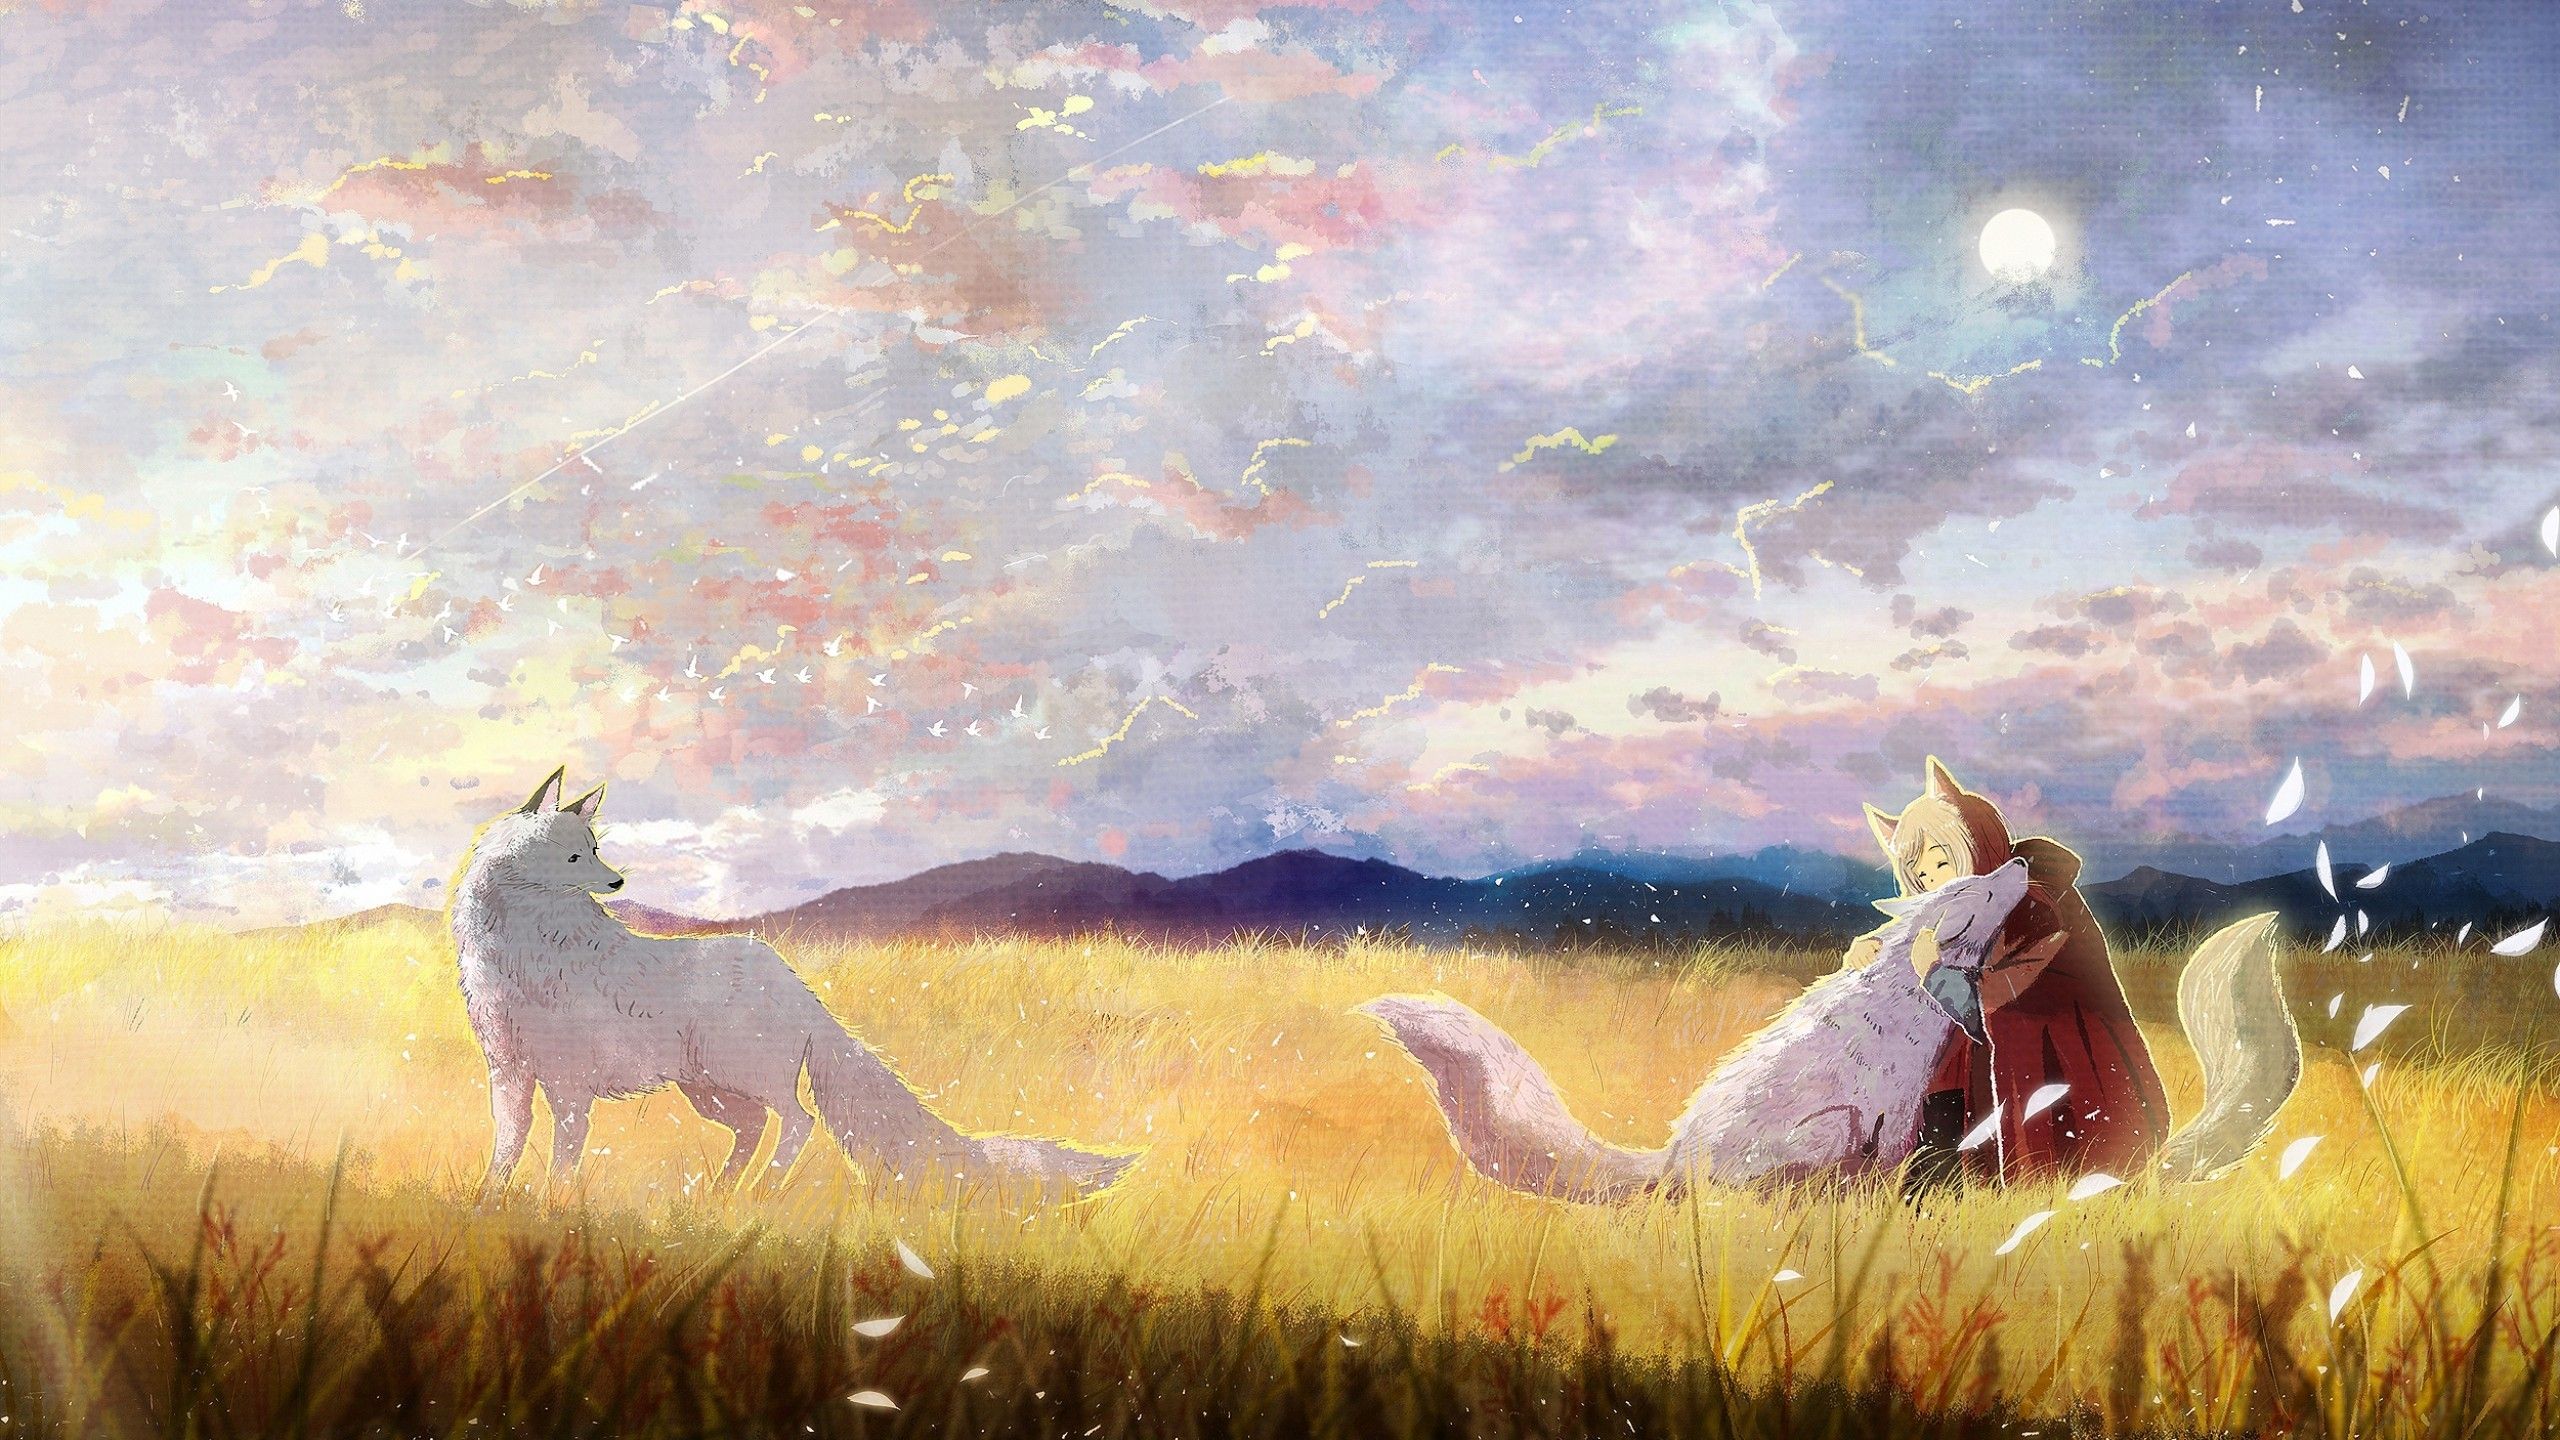 Download 2560x1440 Anime Wolf Girl, White Wolves, Field, Majestic, Clouds, Scenic, Cape, Moon Wallpaper for iMac 27 inch